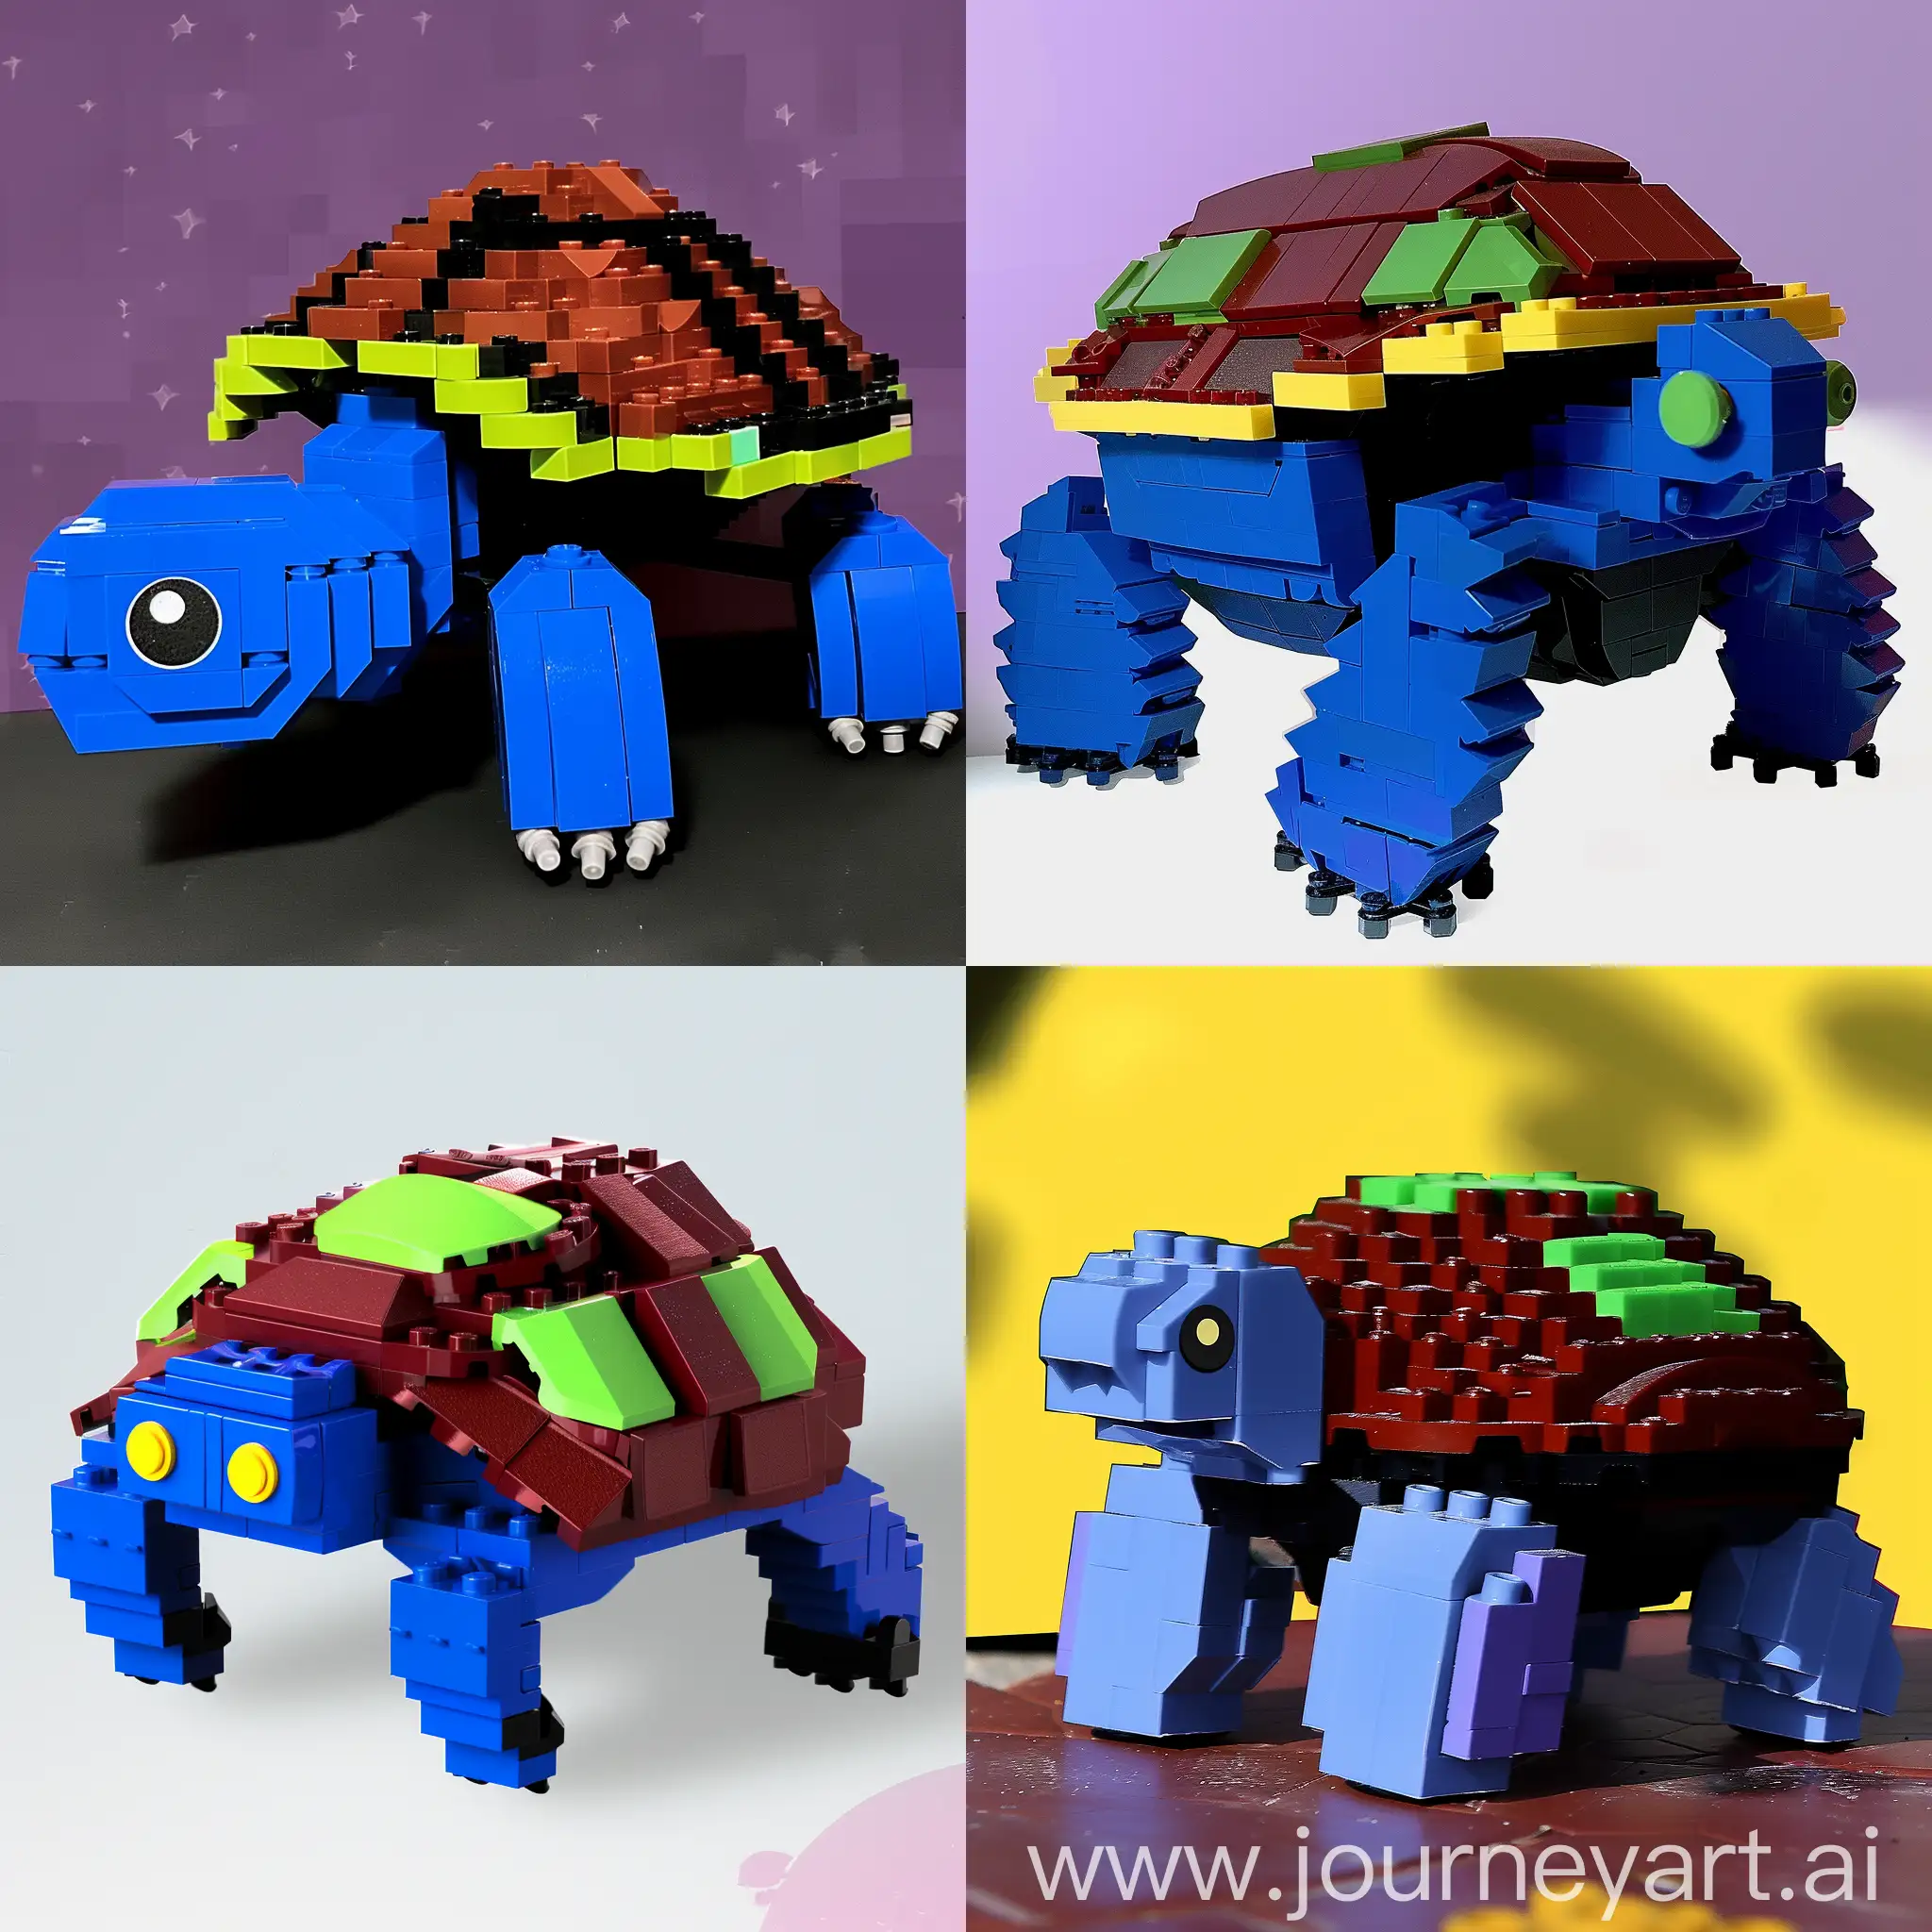 turtle with a blue body, red shell with green spots, assembled from lego